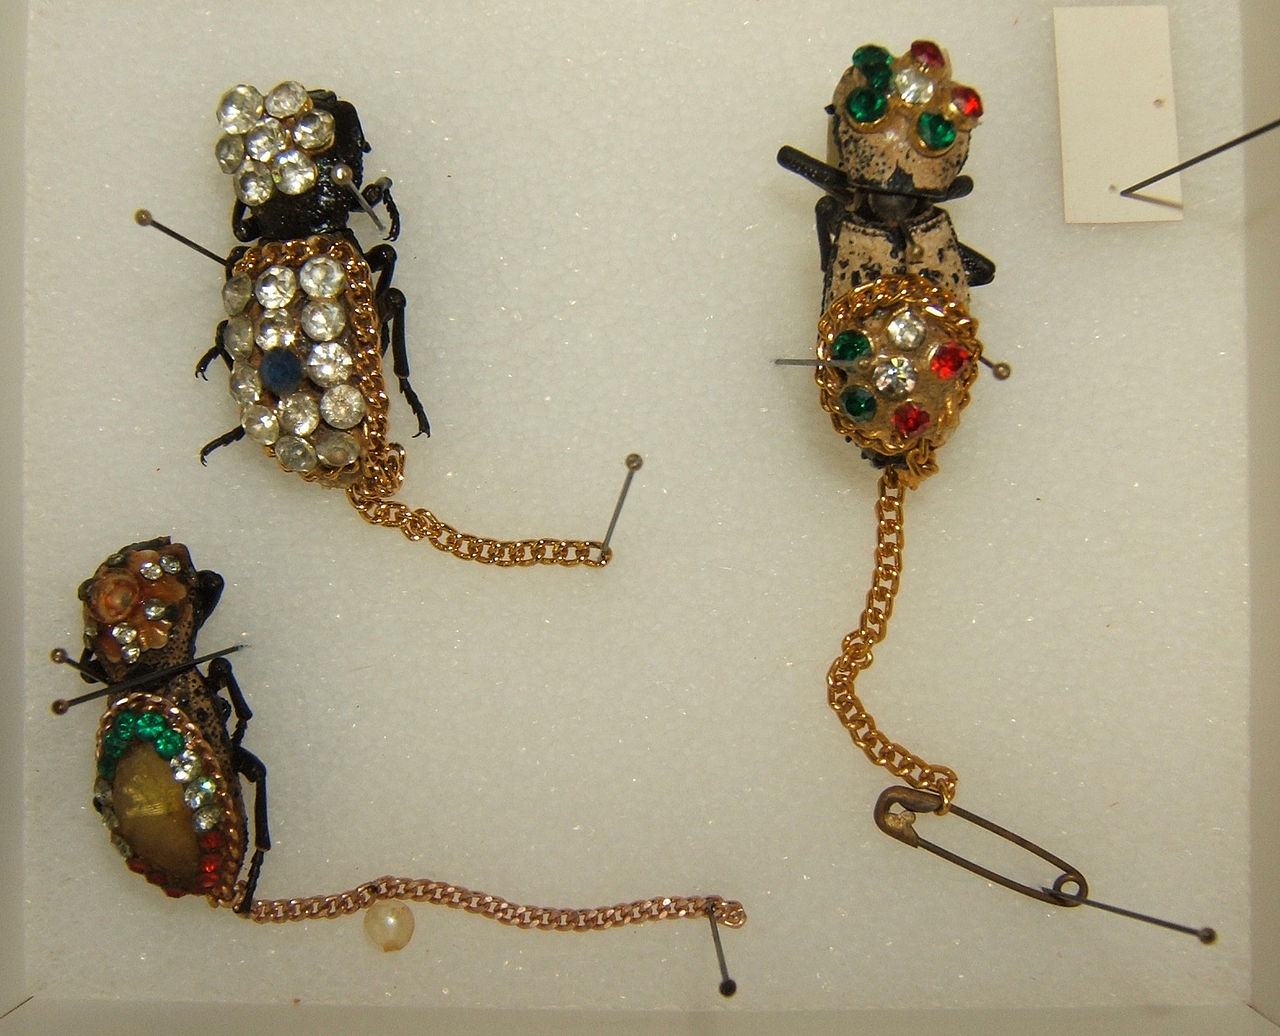 roaches turned into jewelry 